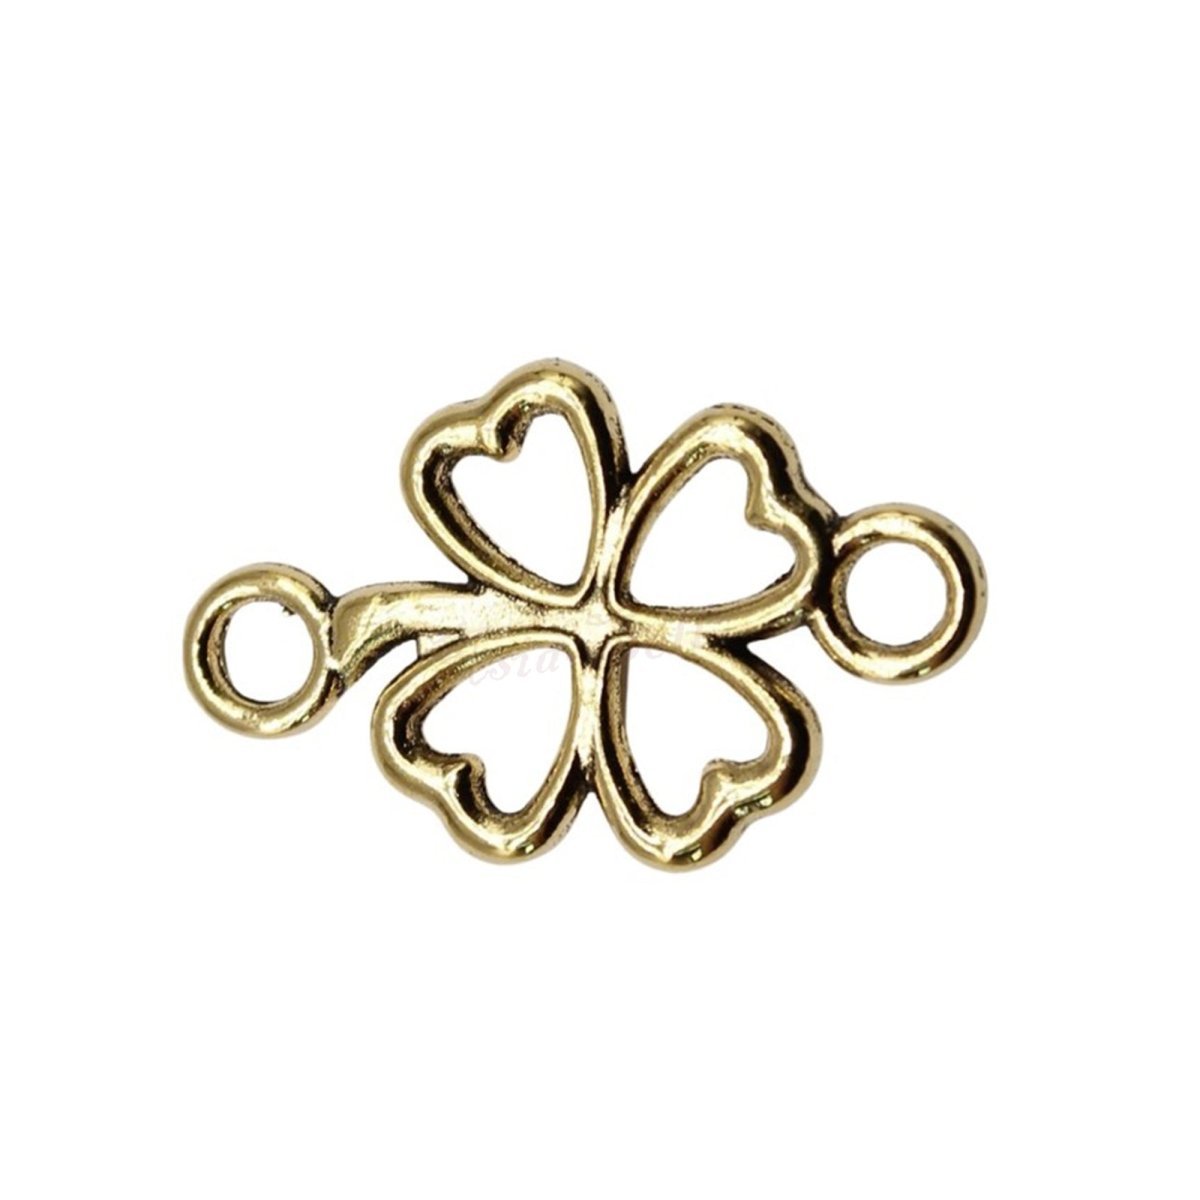 20pcs 20x12mm 4 Leaf Clover Charm Connector Bronze Silver Gold Lucky Charms - Gold - - Asia Sell